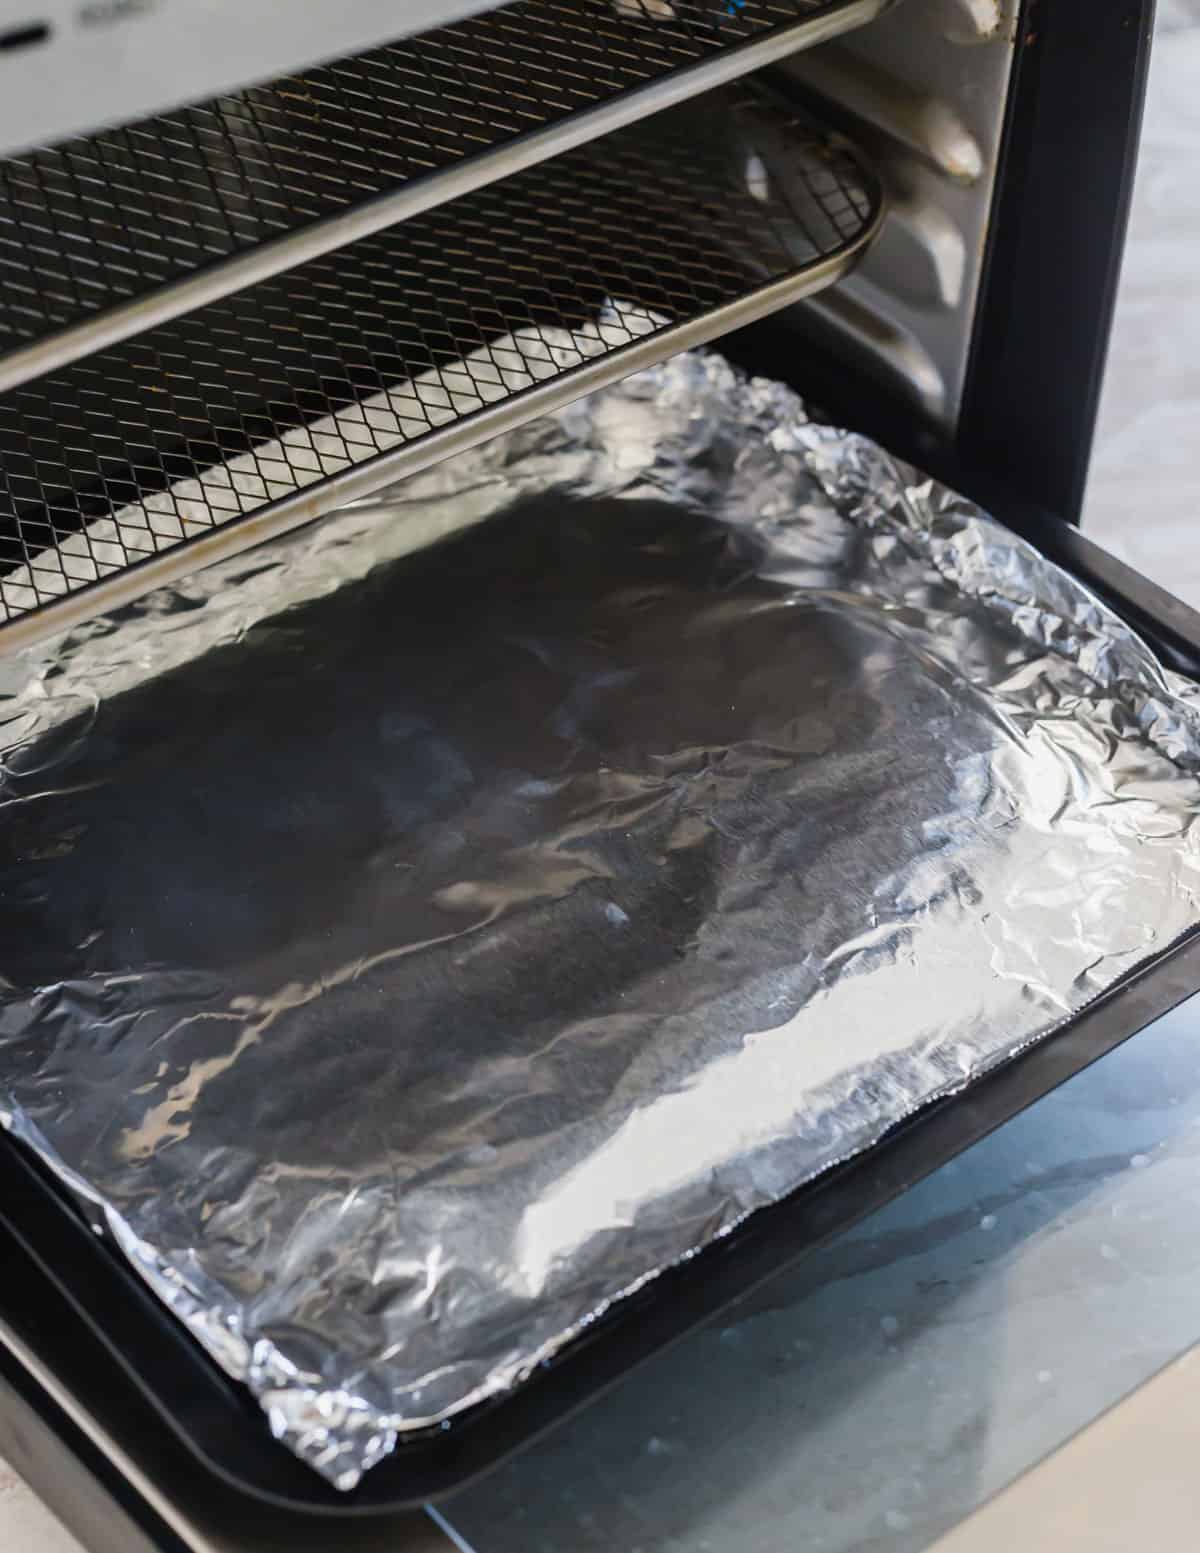 Inside of an air fryer with aluminum foil lining the bottom tray for easy clean up.